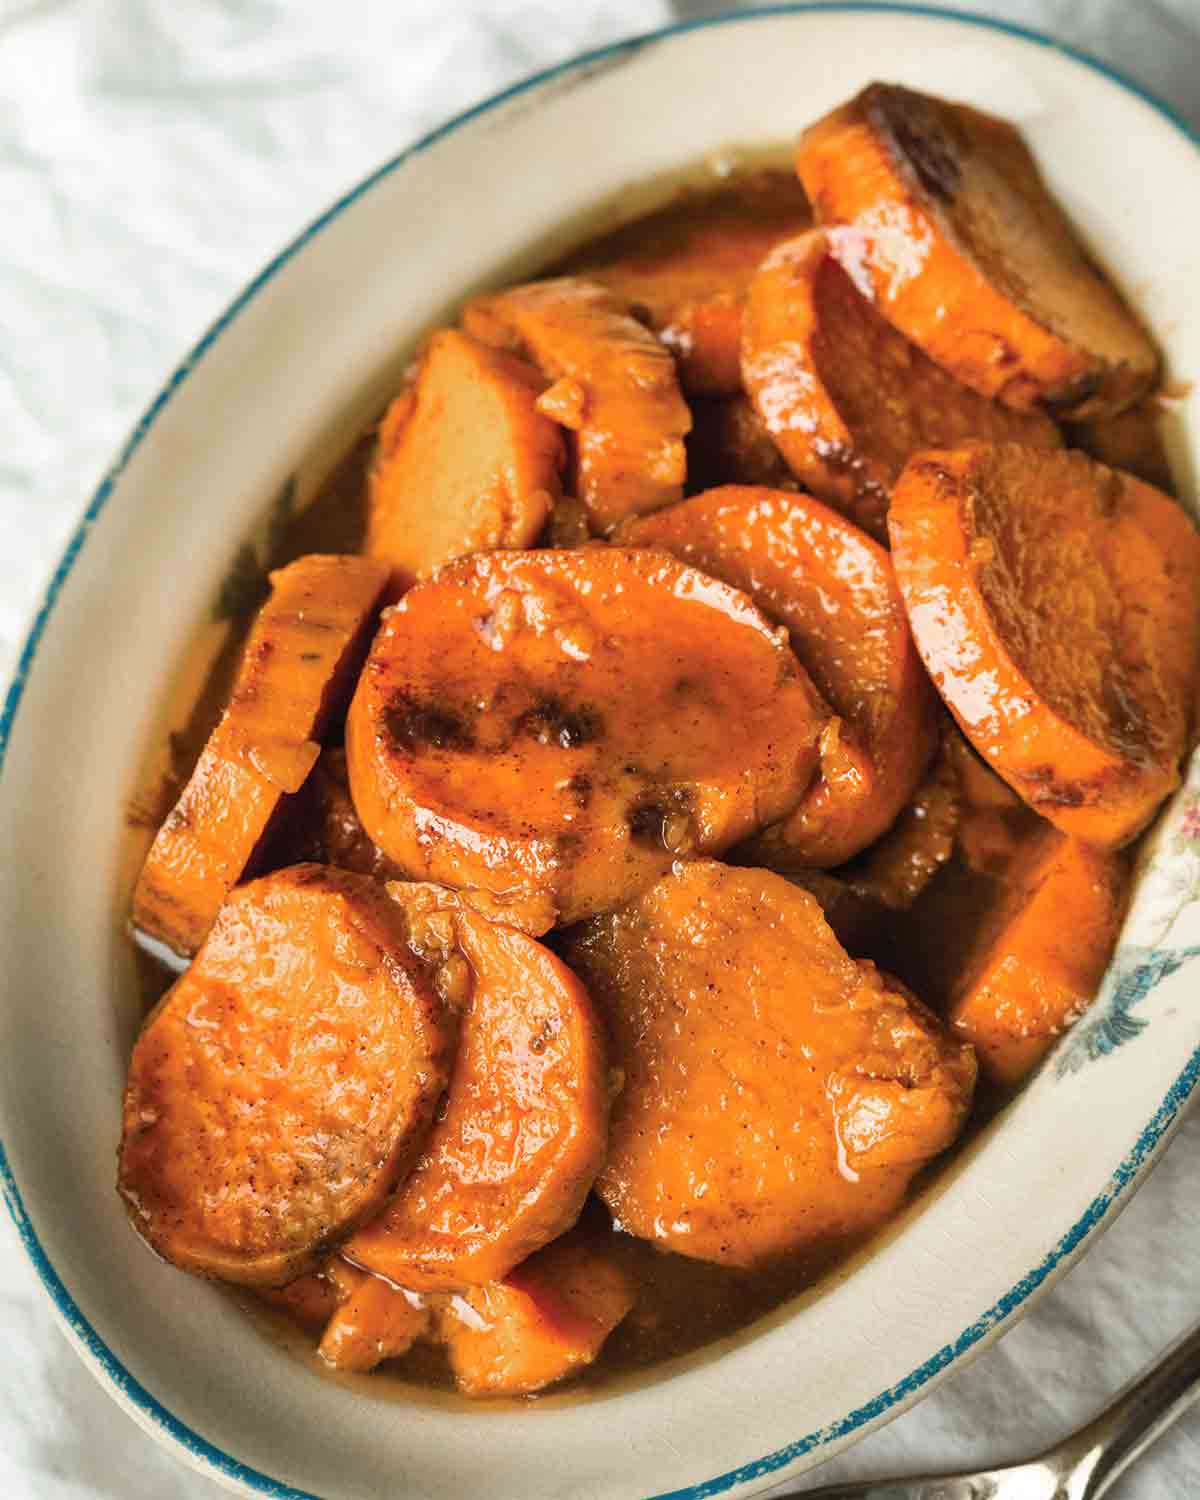 Sliced candied sweet potatoes in an oval baking dish.